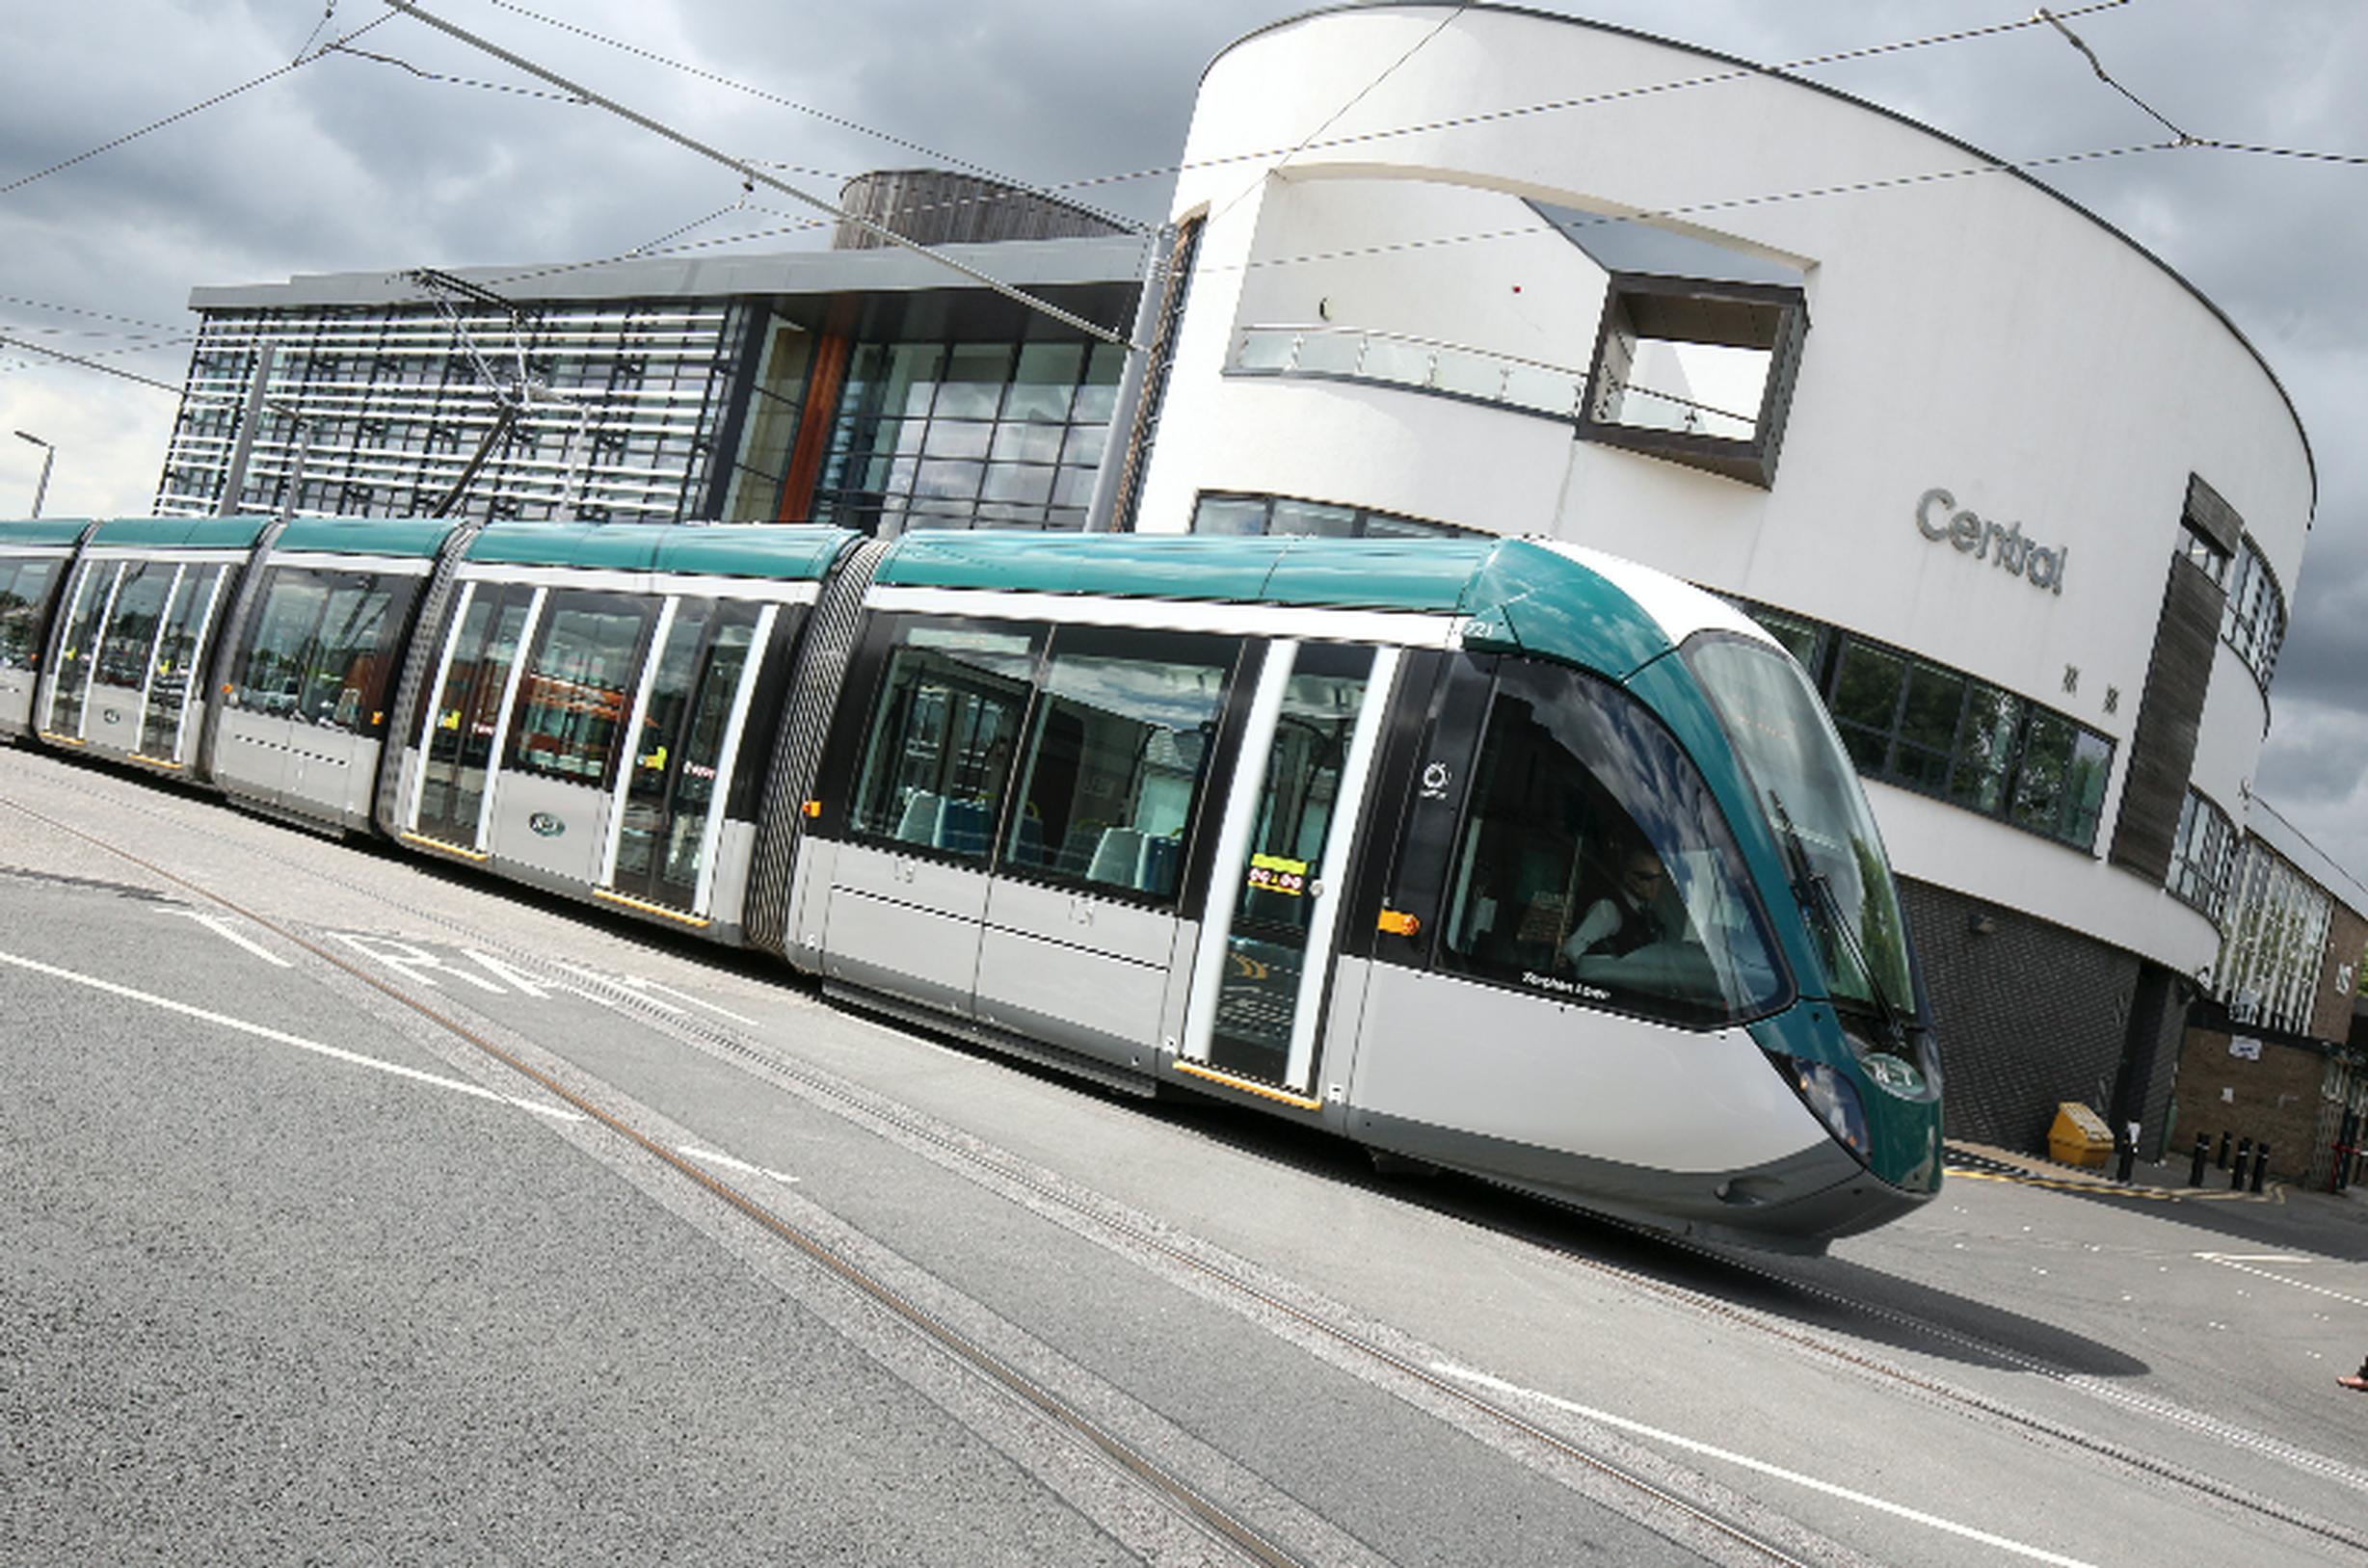 Nottingham has used its WPL revenue stream to fund an expansion of the city`s NET tram system